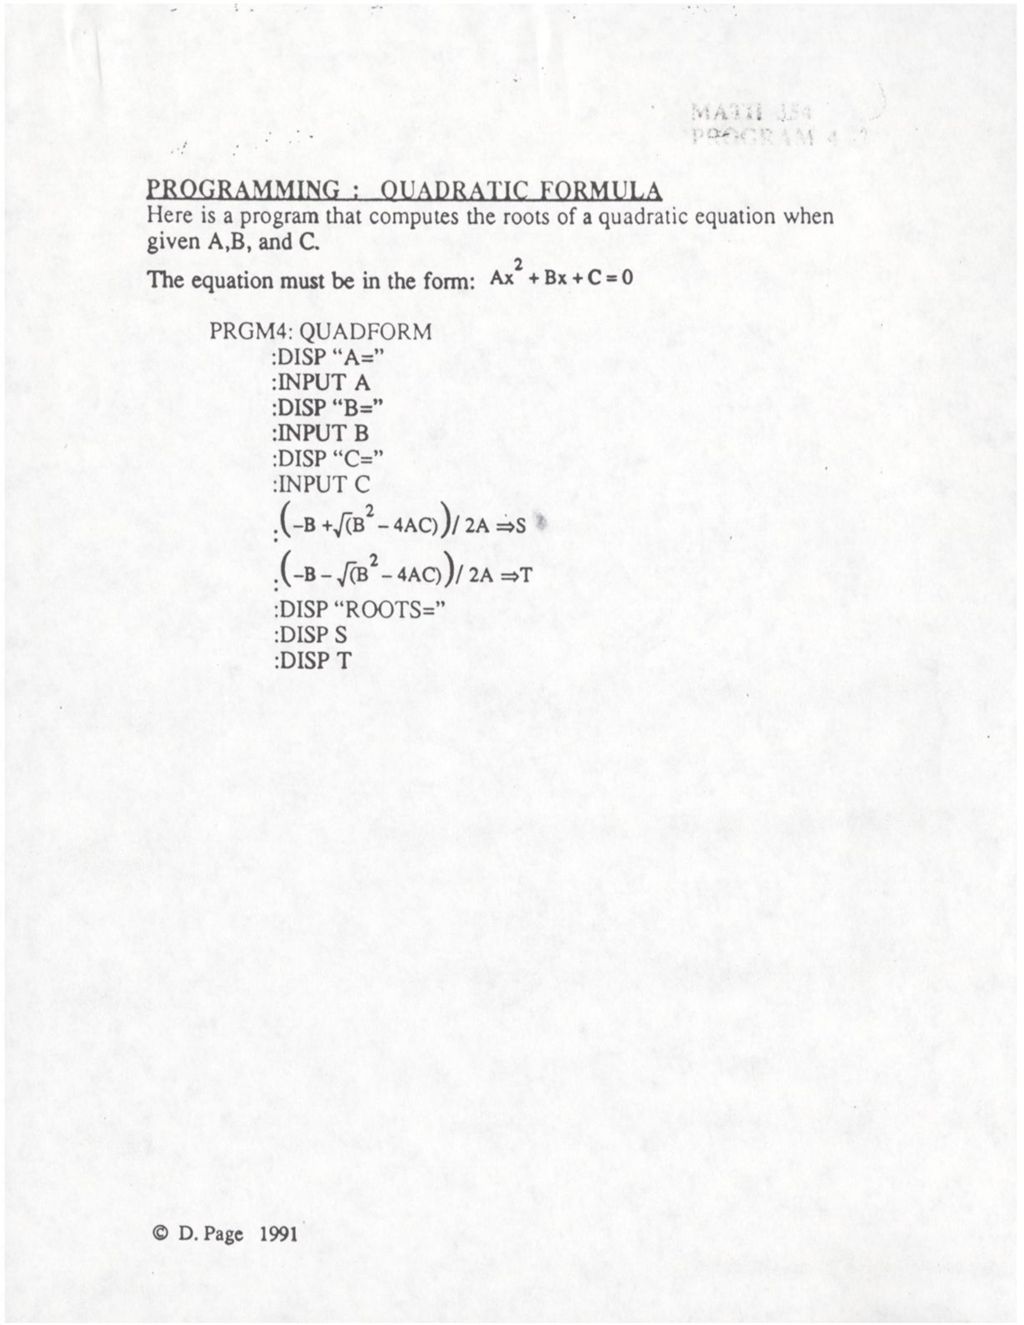 Miniature of Programming: Quadratic Formula w/ Page note about a new version of the same program for TI-81 calculator